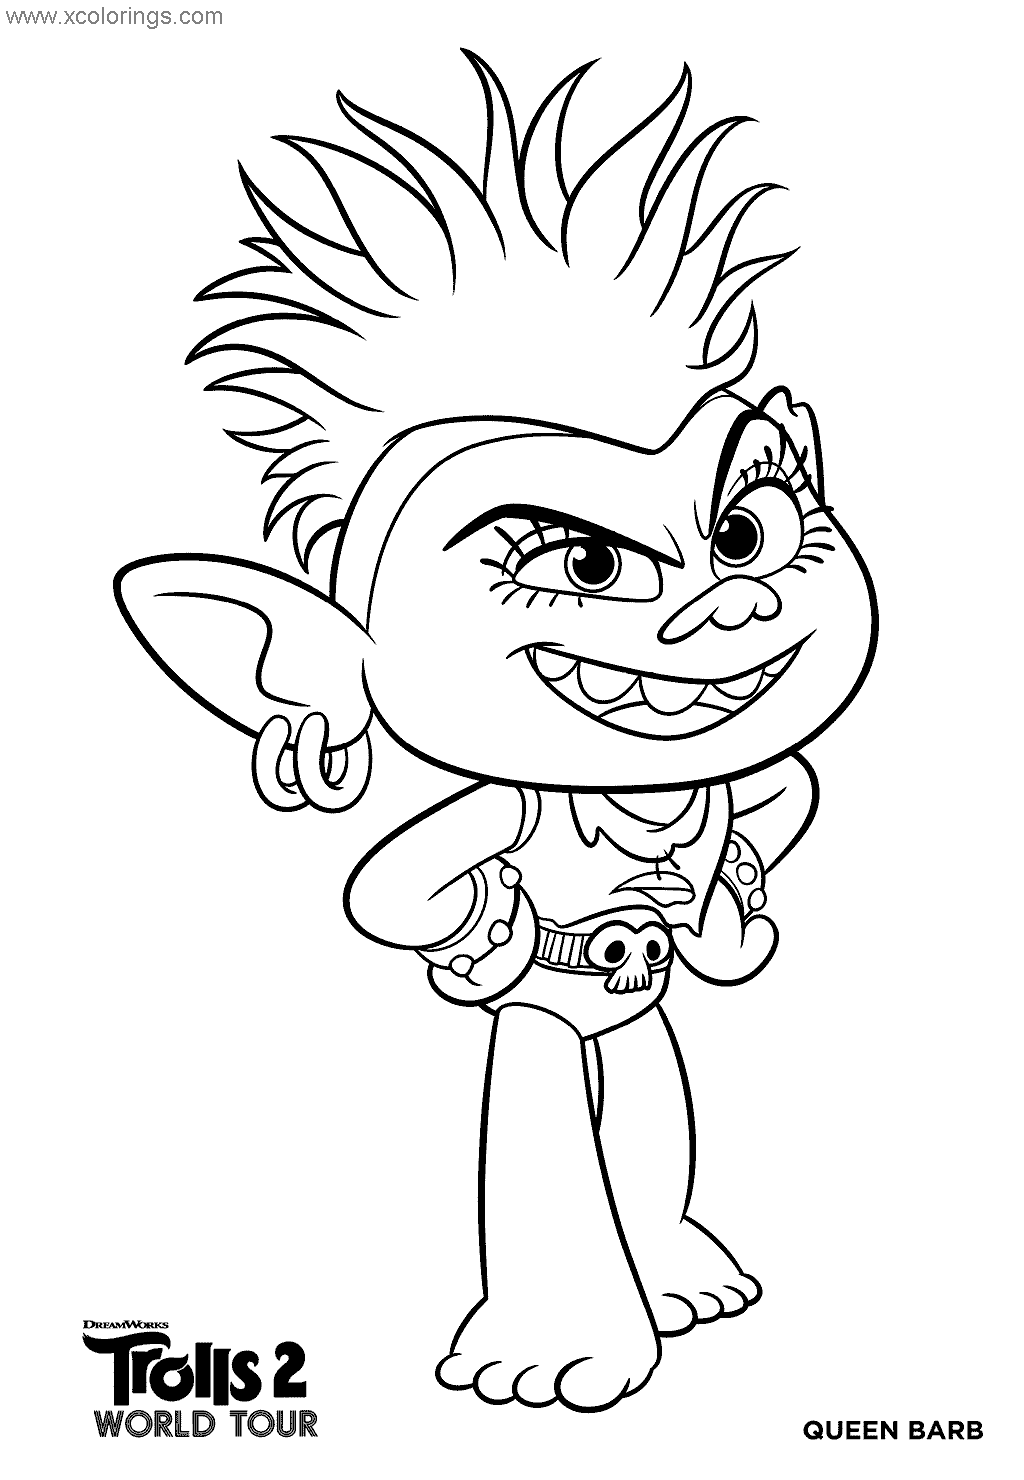 Free Trolls World Tour Coloring Pages Queen Barb printable